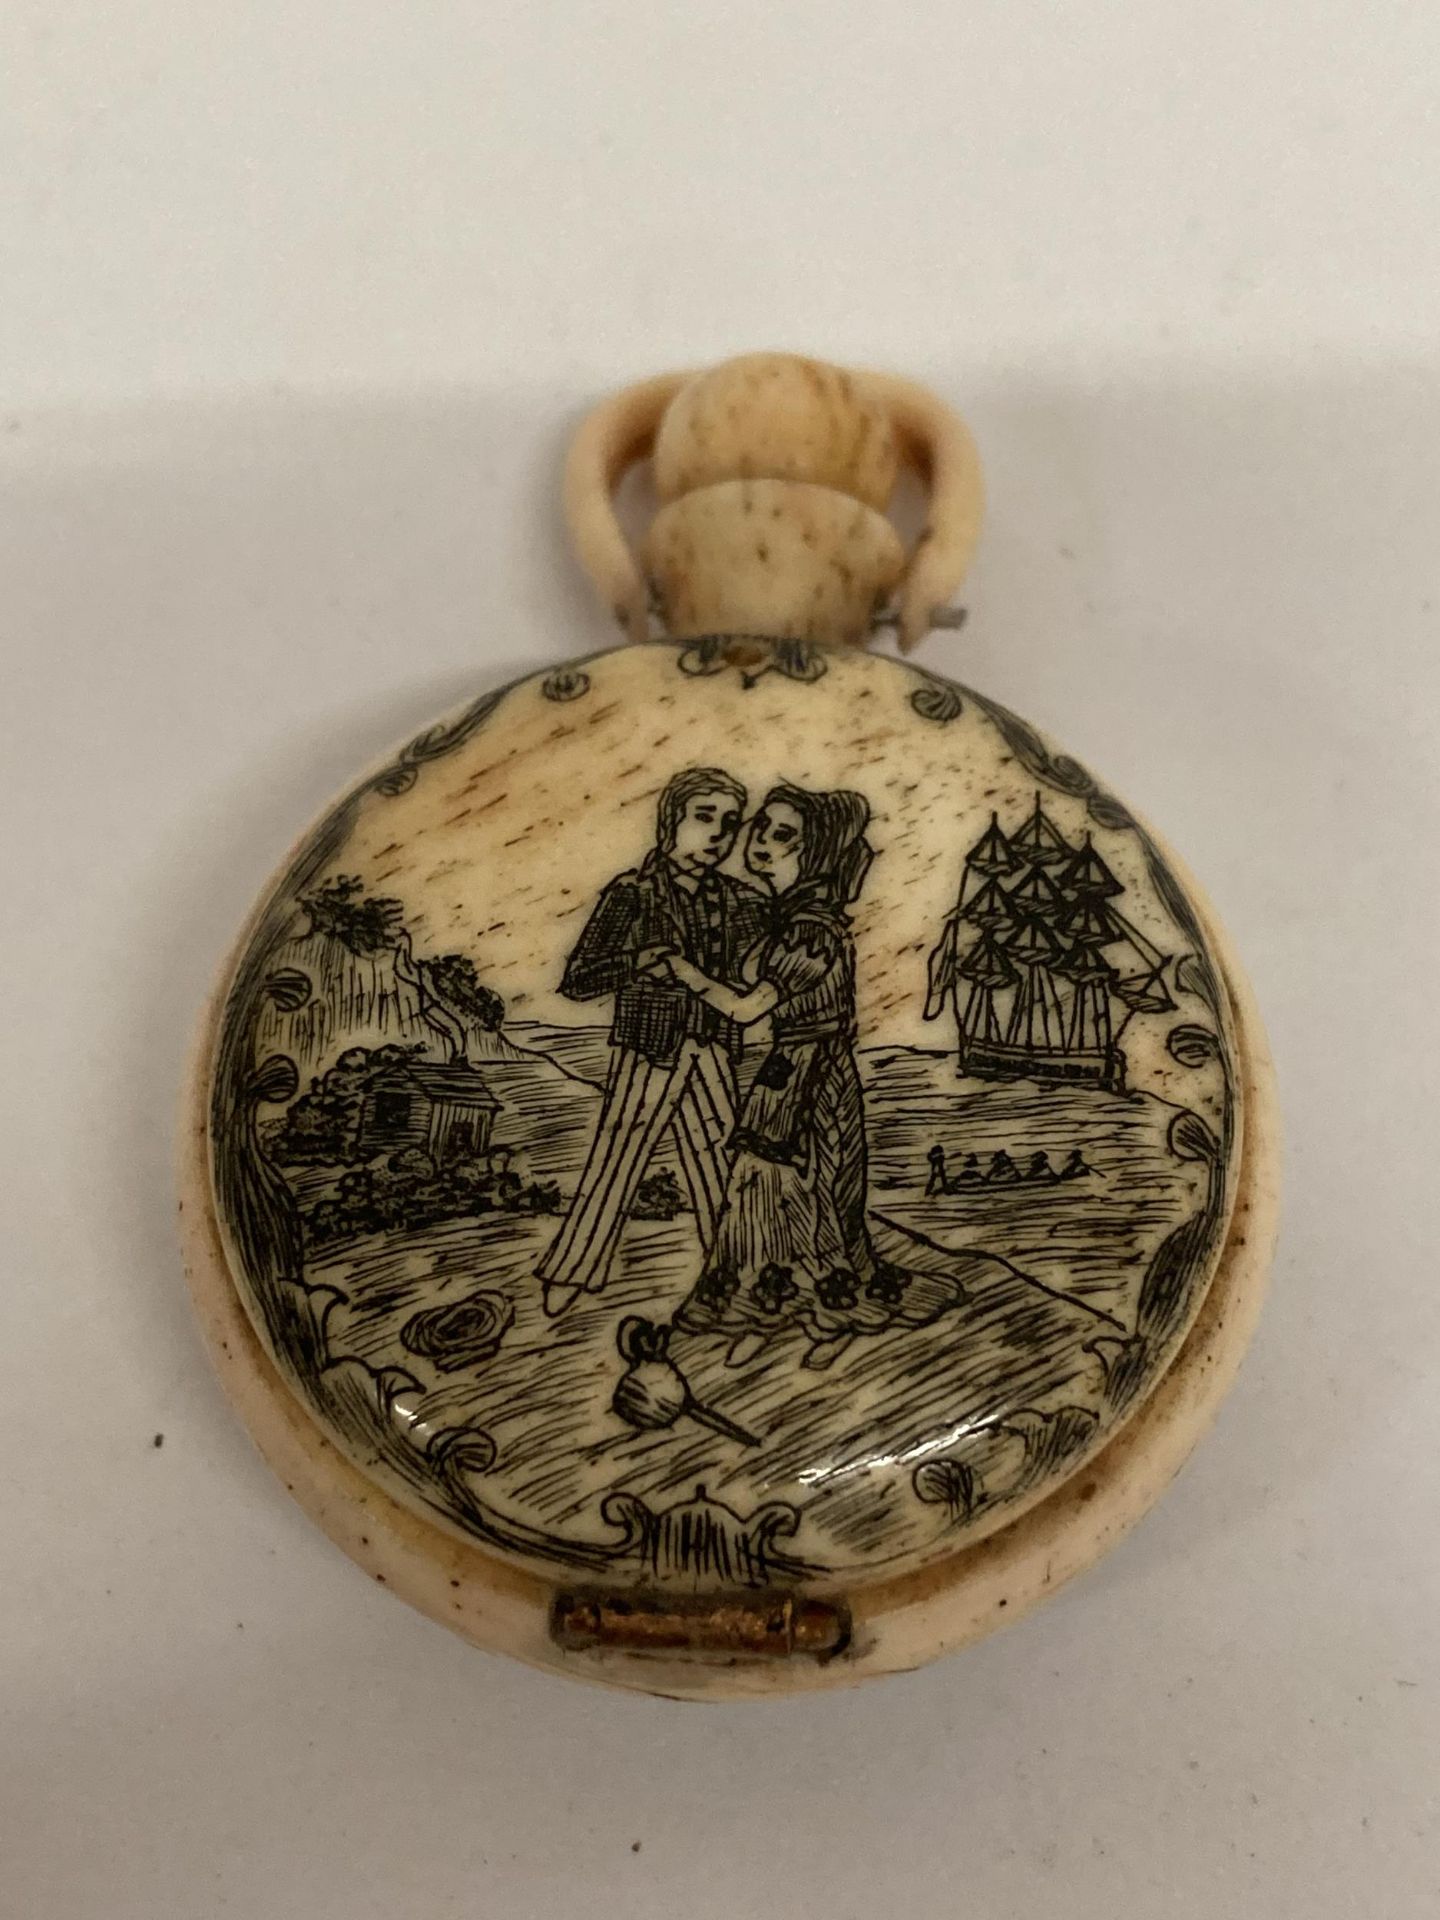 A BONE CARVED SWEET HEARTS COMPASS WITH BIRD AND FIGURES DESIGN - Image 2 of 3